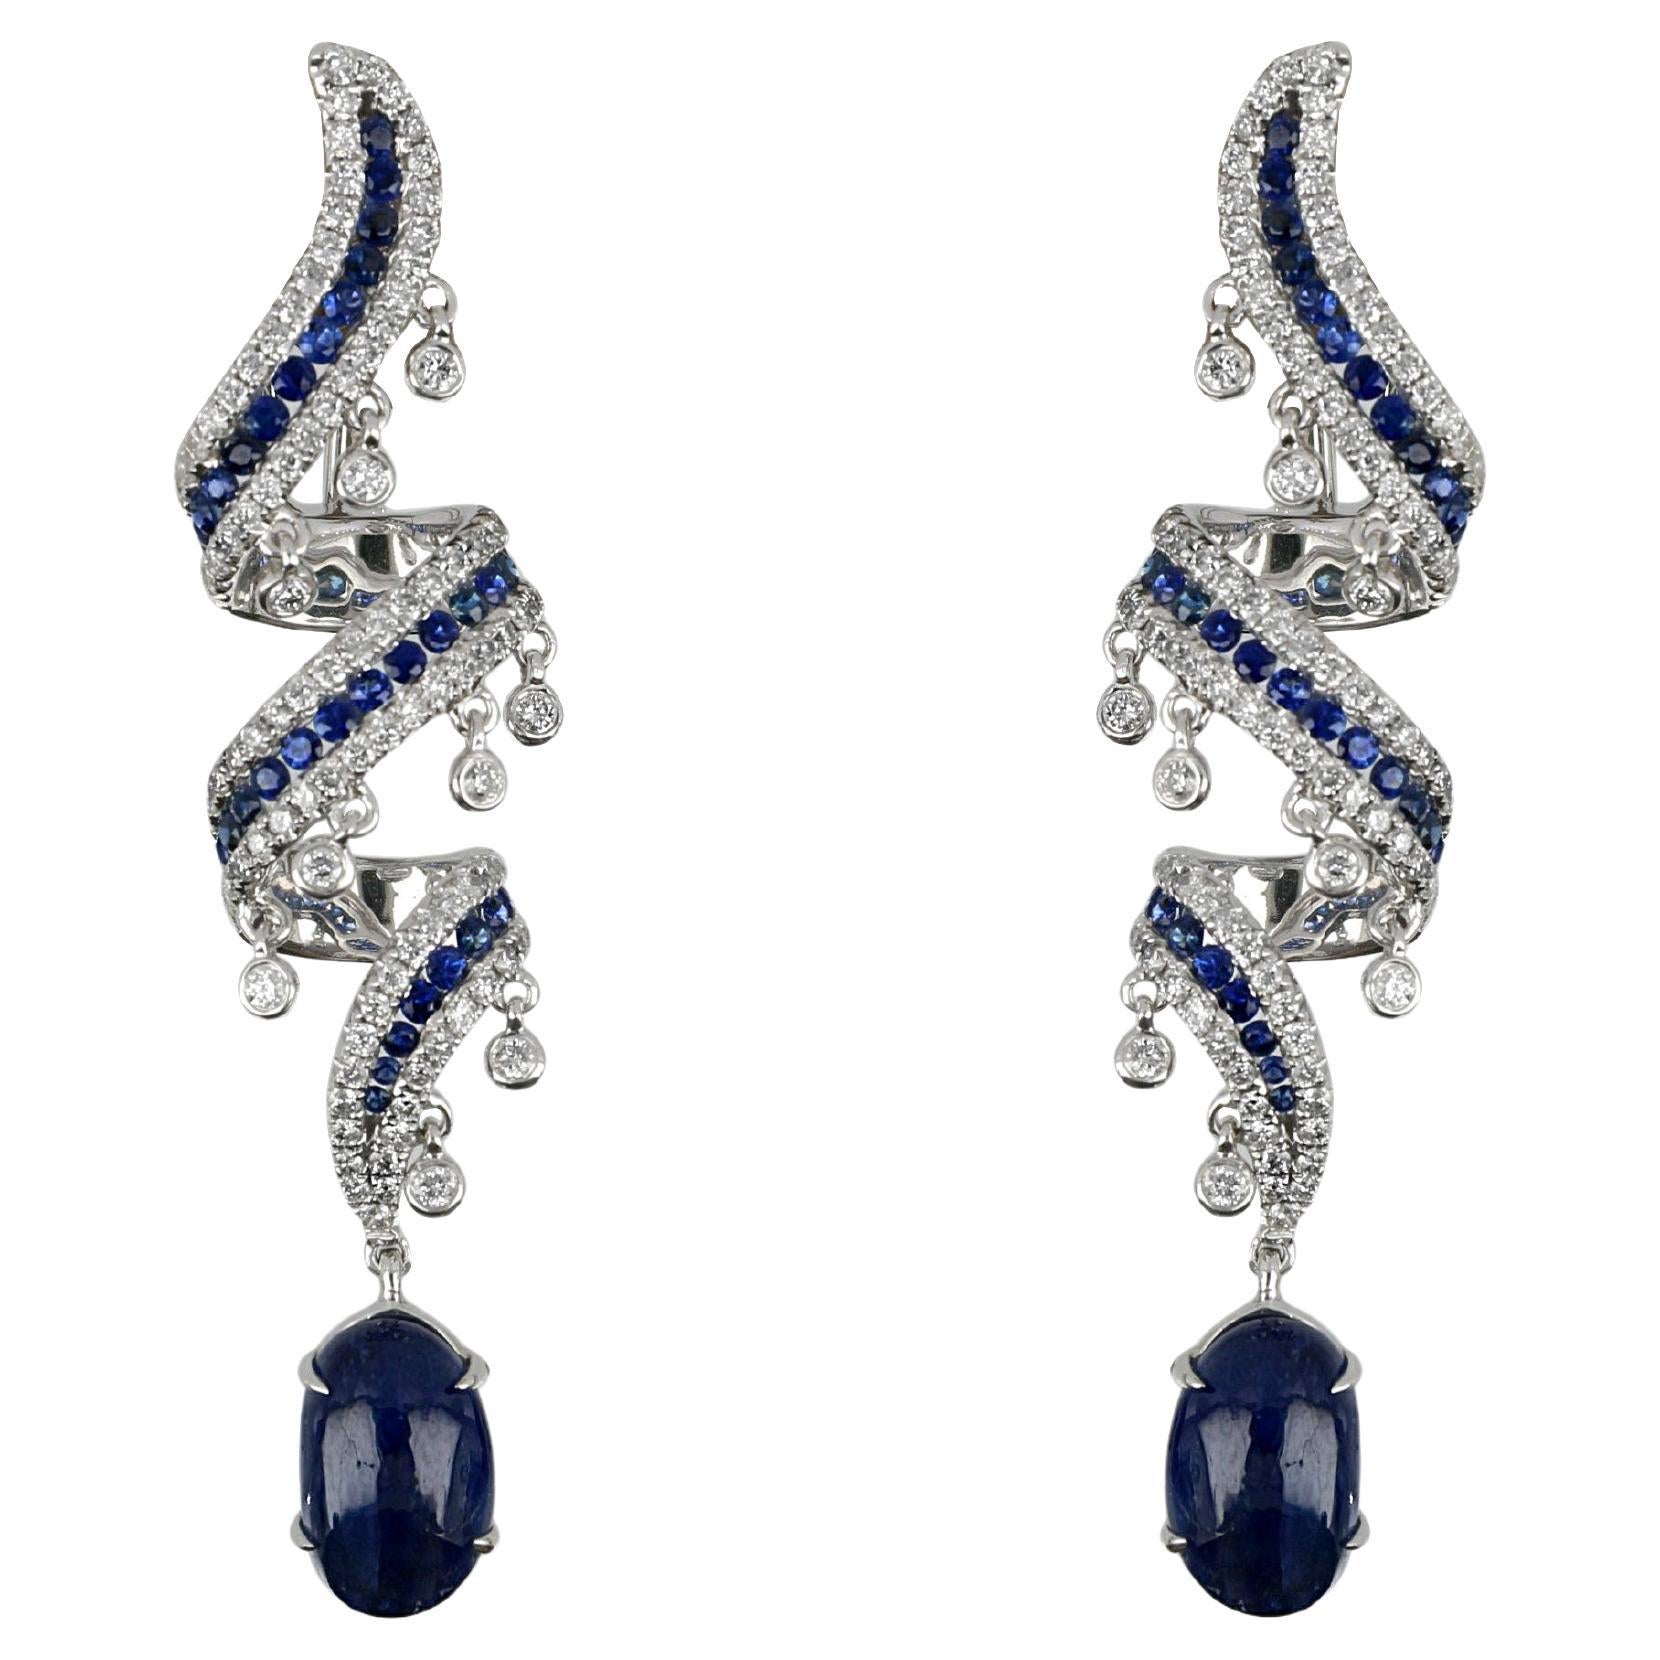 18k White Gold Dangling Earrings with Blue Sapphires and Round Cut Diamonds